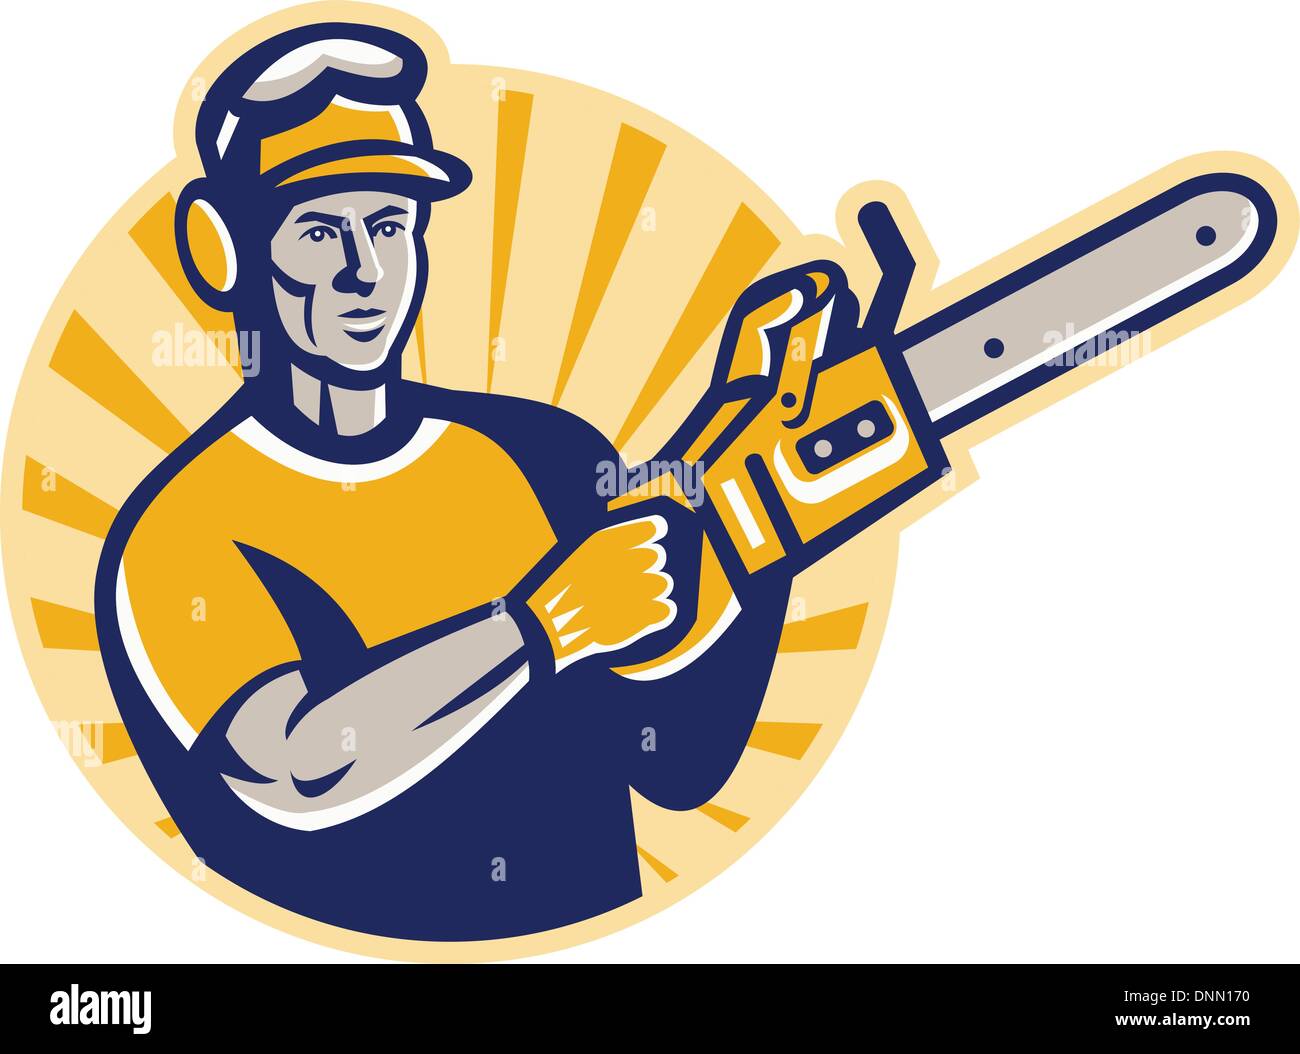 Illustration of an arborist tree surgeon cutter pruner with chain saw set inside circle done in retro style. Stock Vector